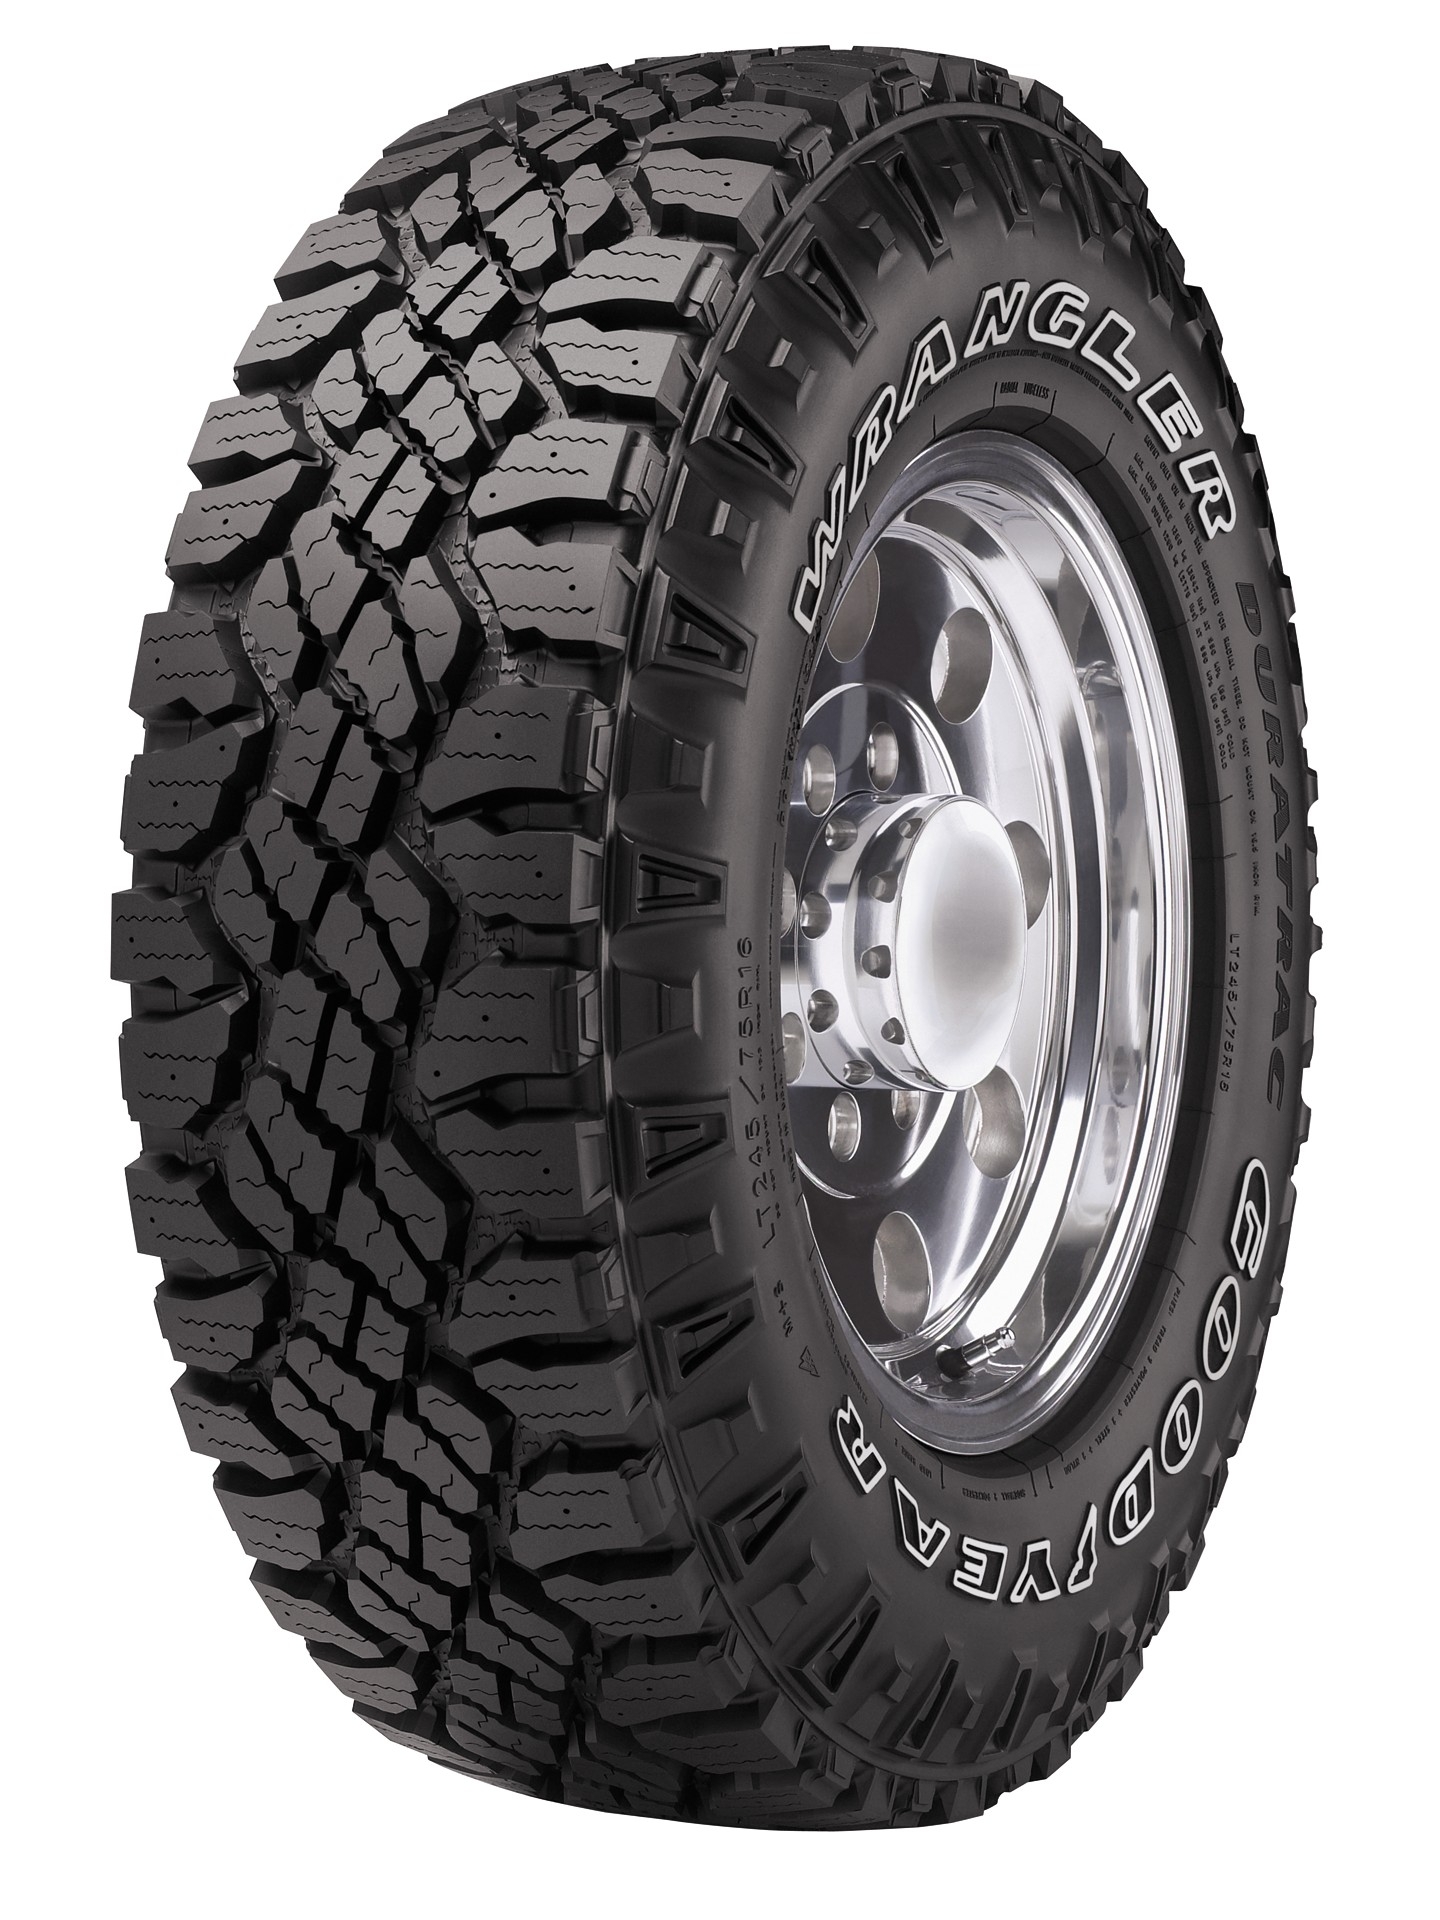 Expect to get plenty of use out of these tires if you spend a majority of the time off-road.